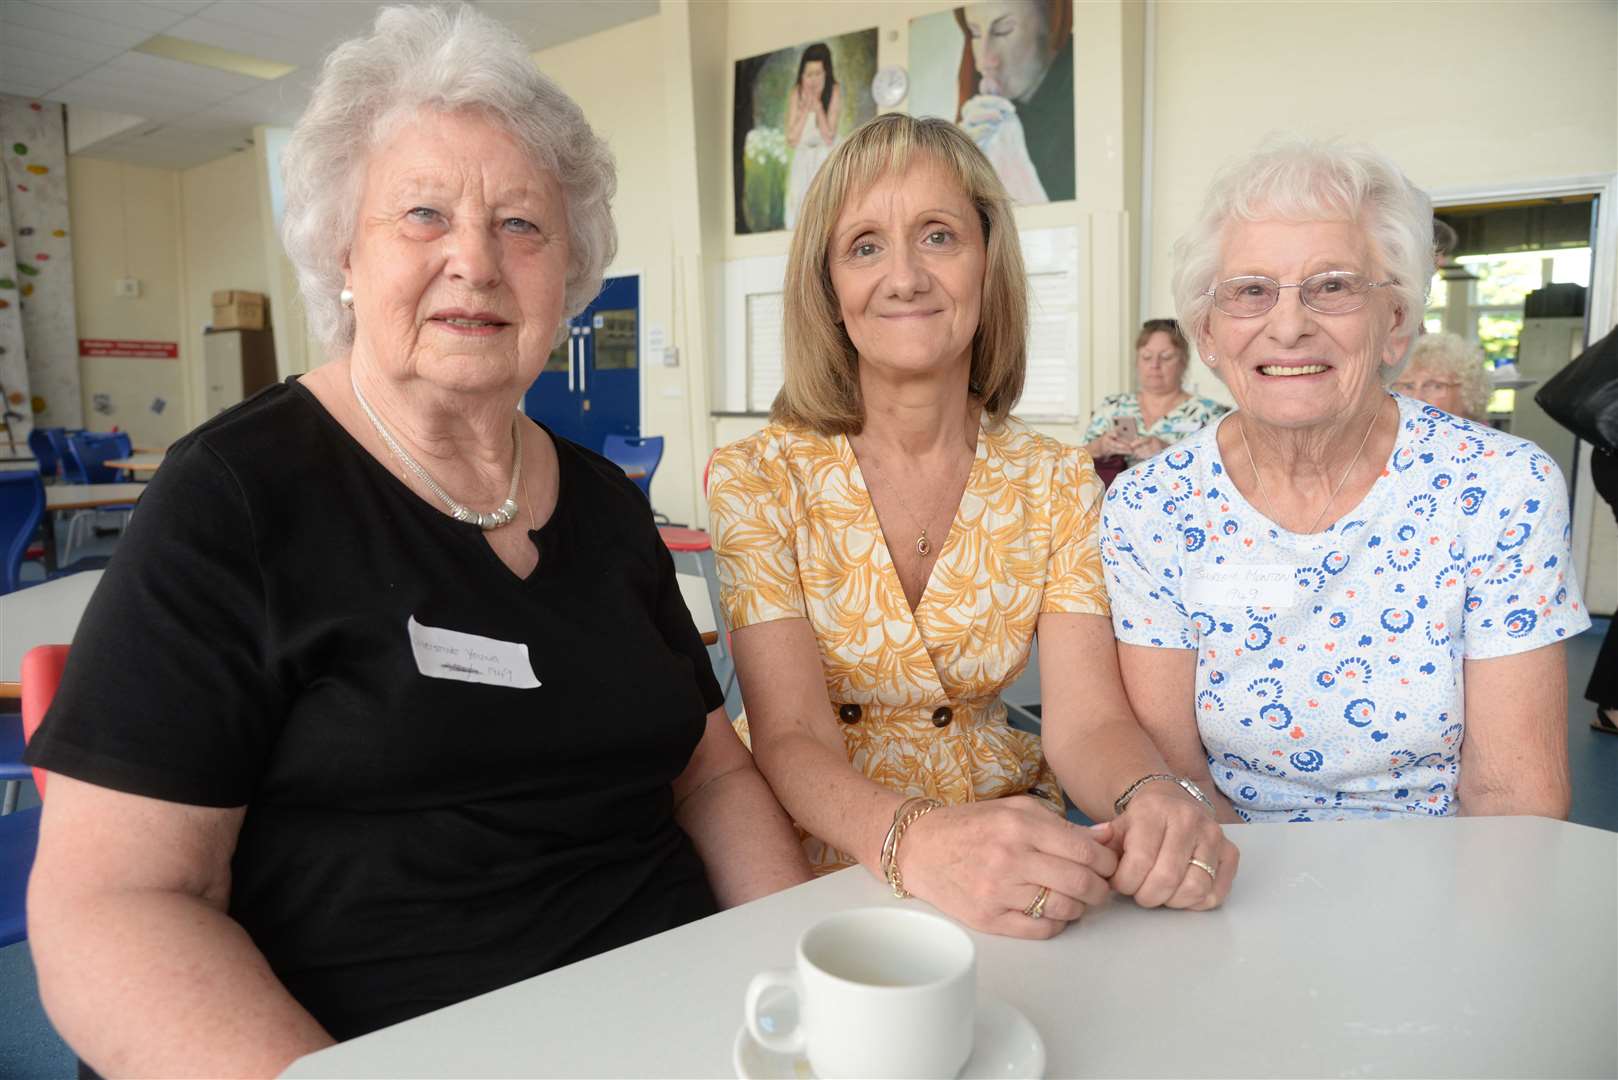 Angela Scully (centre) with two former pupils at a school reunion event last year